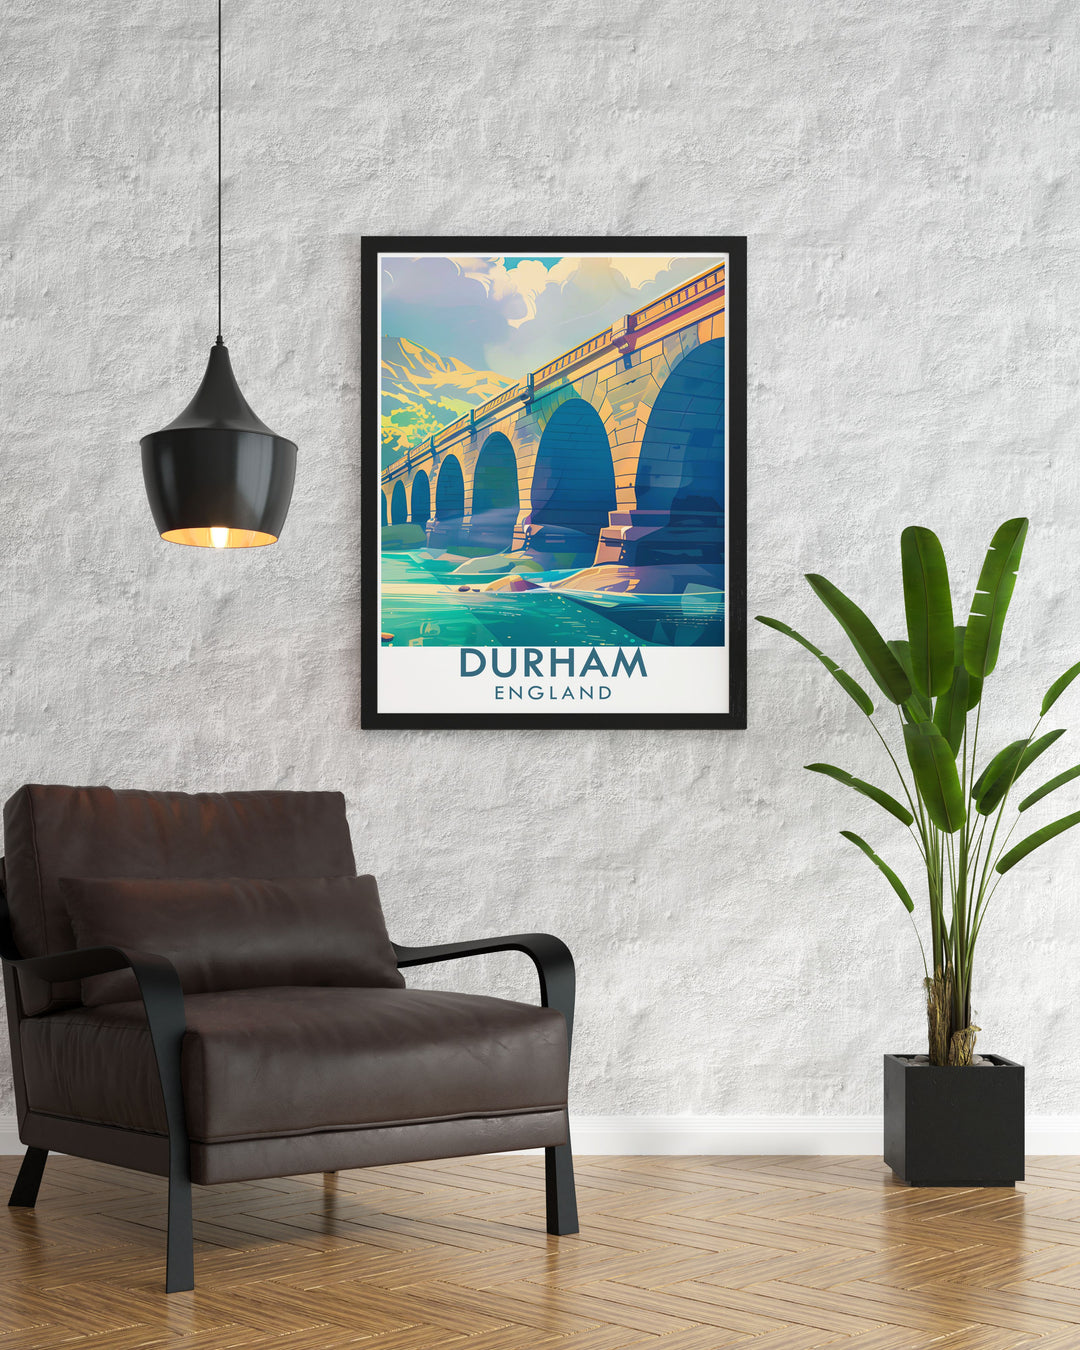 The majestic Prebends Bridge and its scenic river views are beautifully illustrated in this poster, celebrating the historical and natural beauty of Durham.